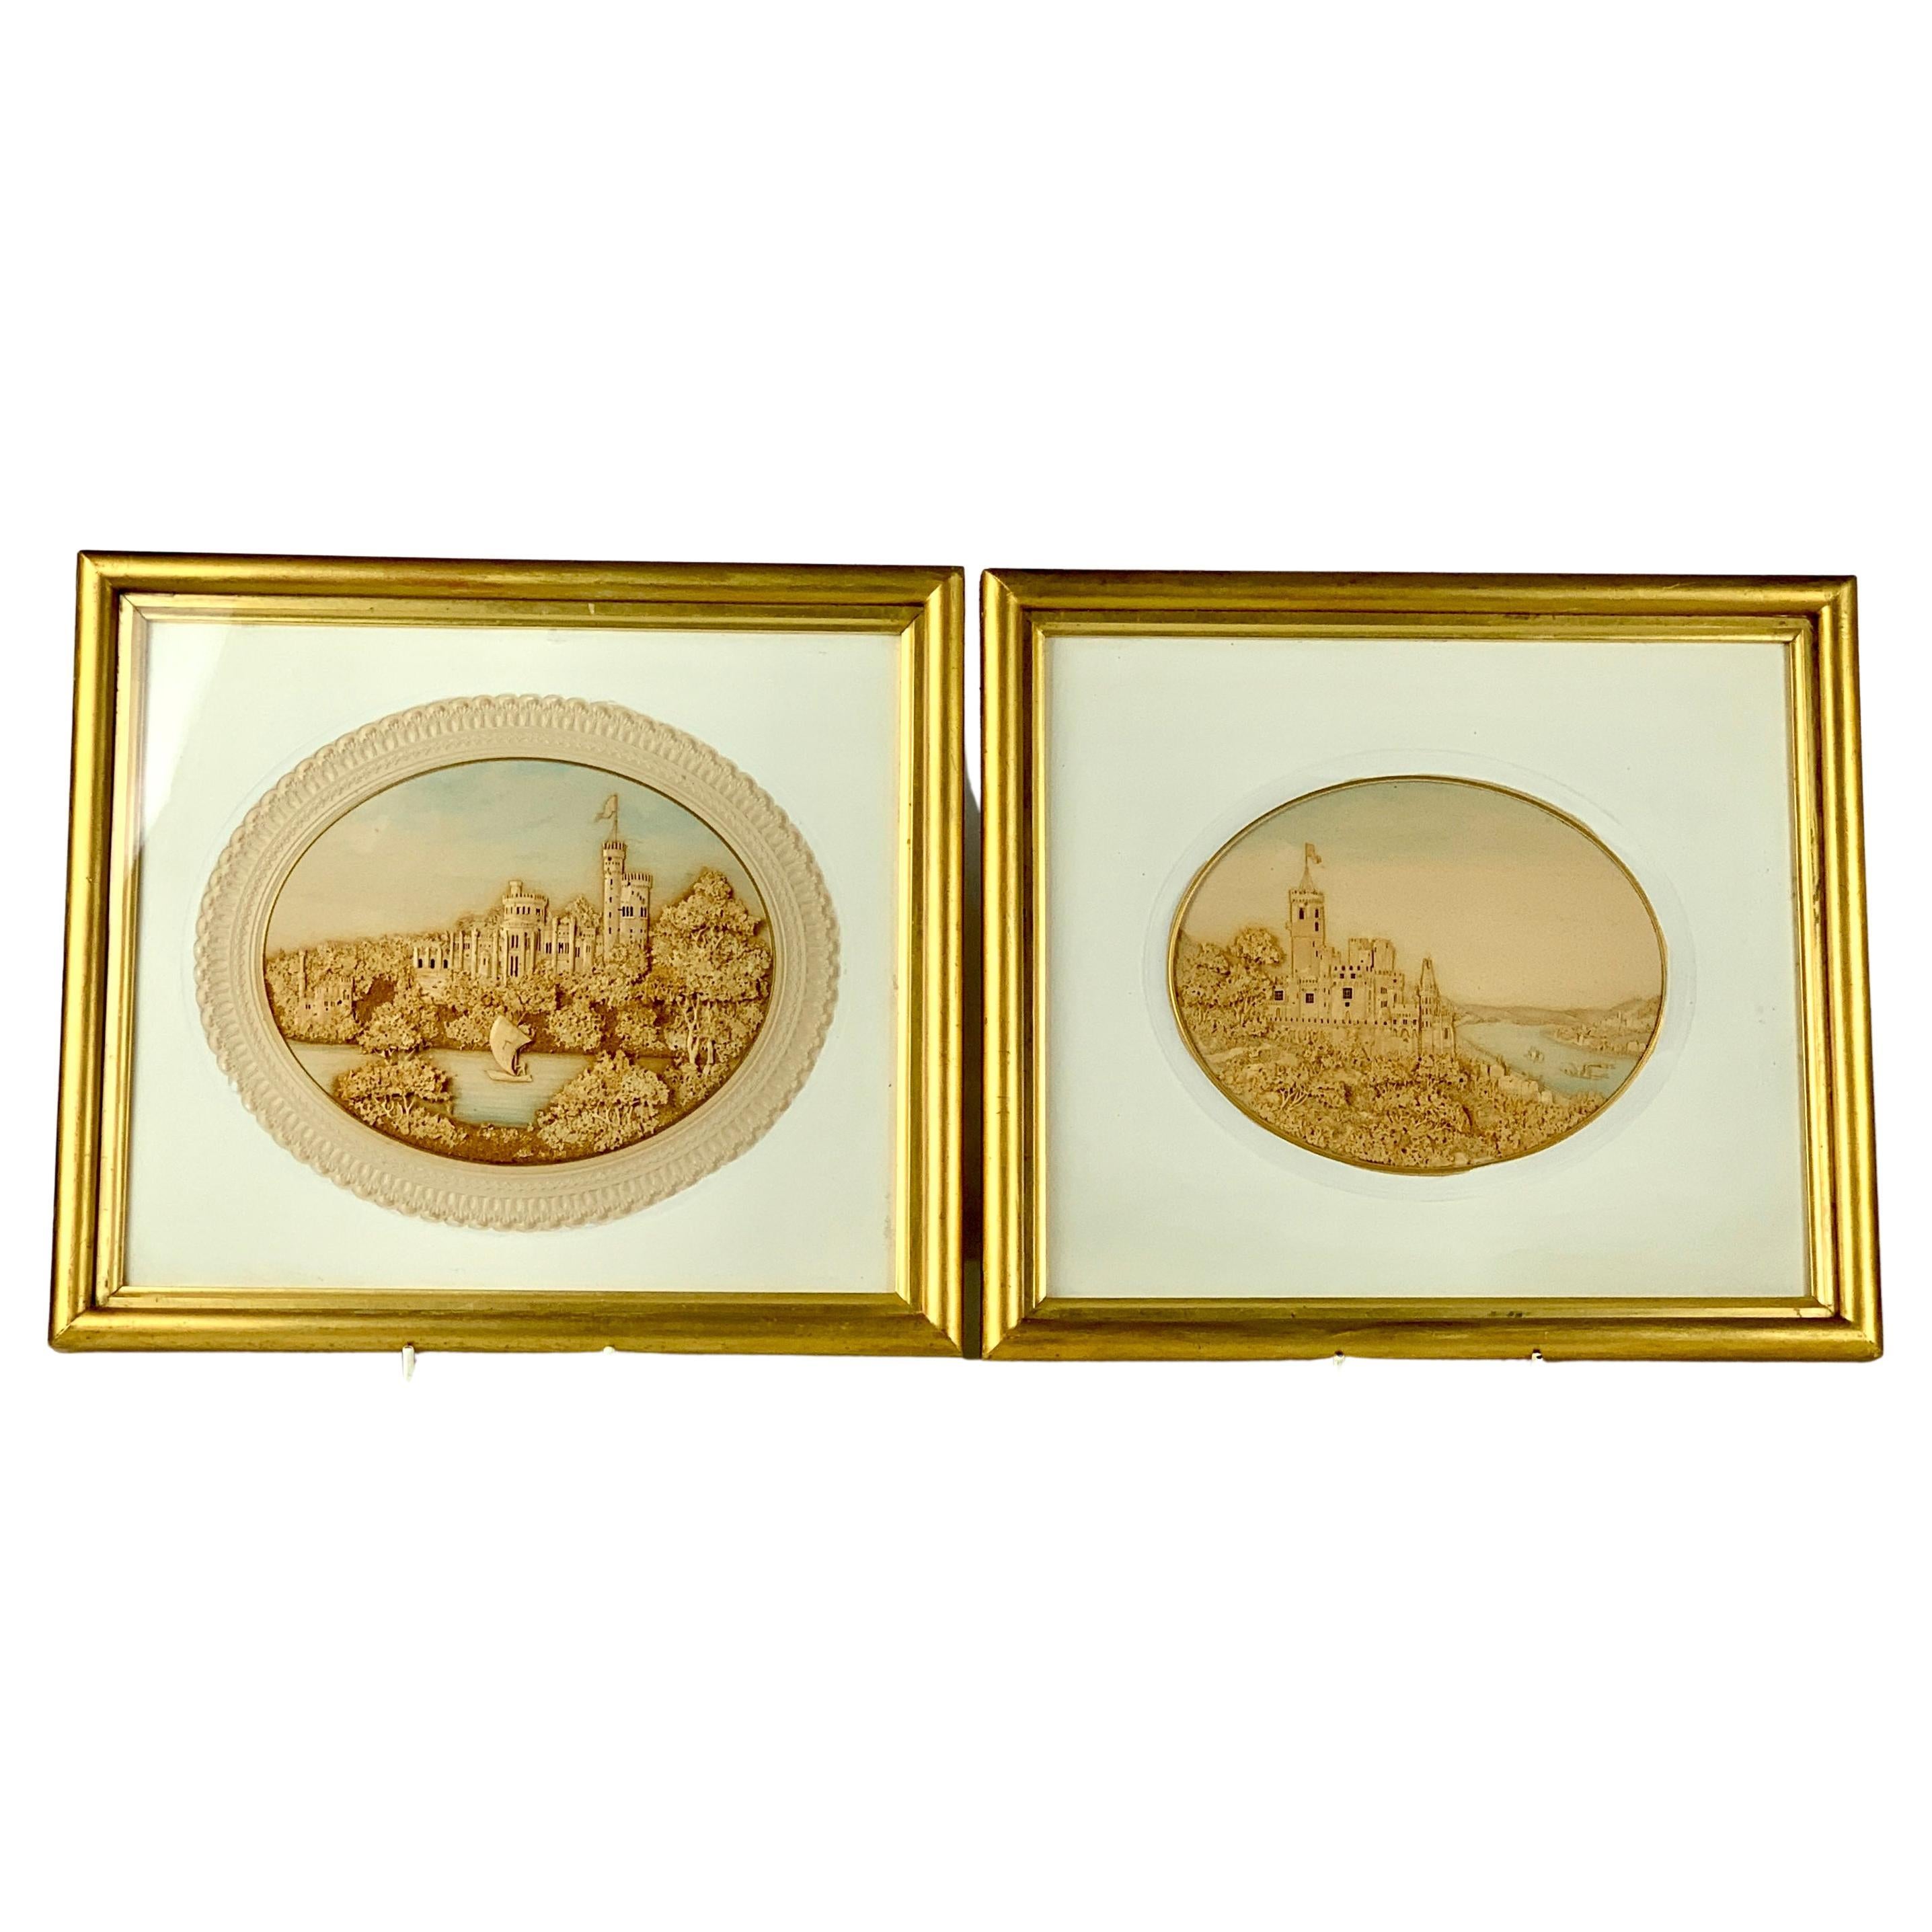 Pair Hand Crafted Corkwork Dioramas with Scenes of English Castles Circa 1840 For Sale